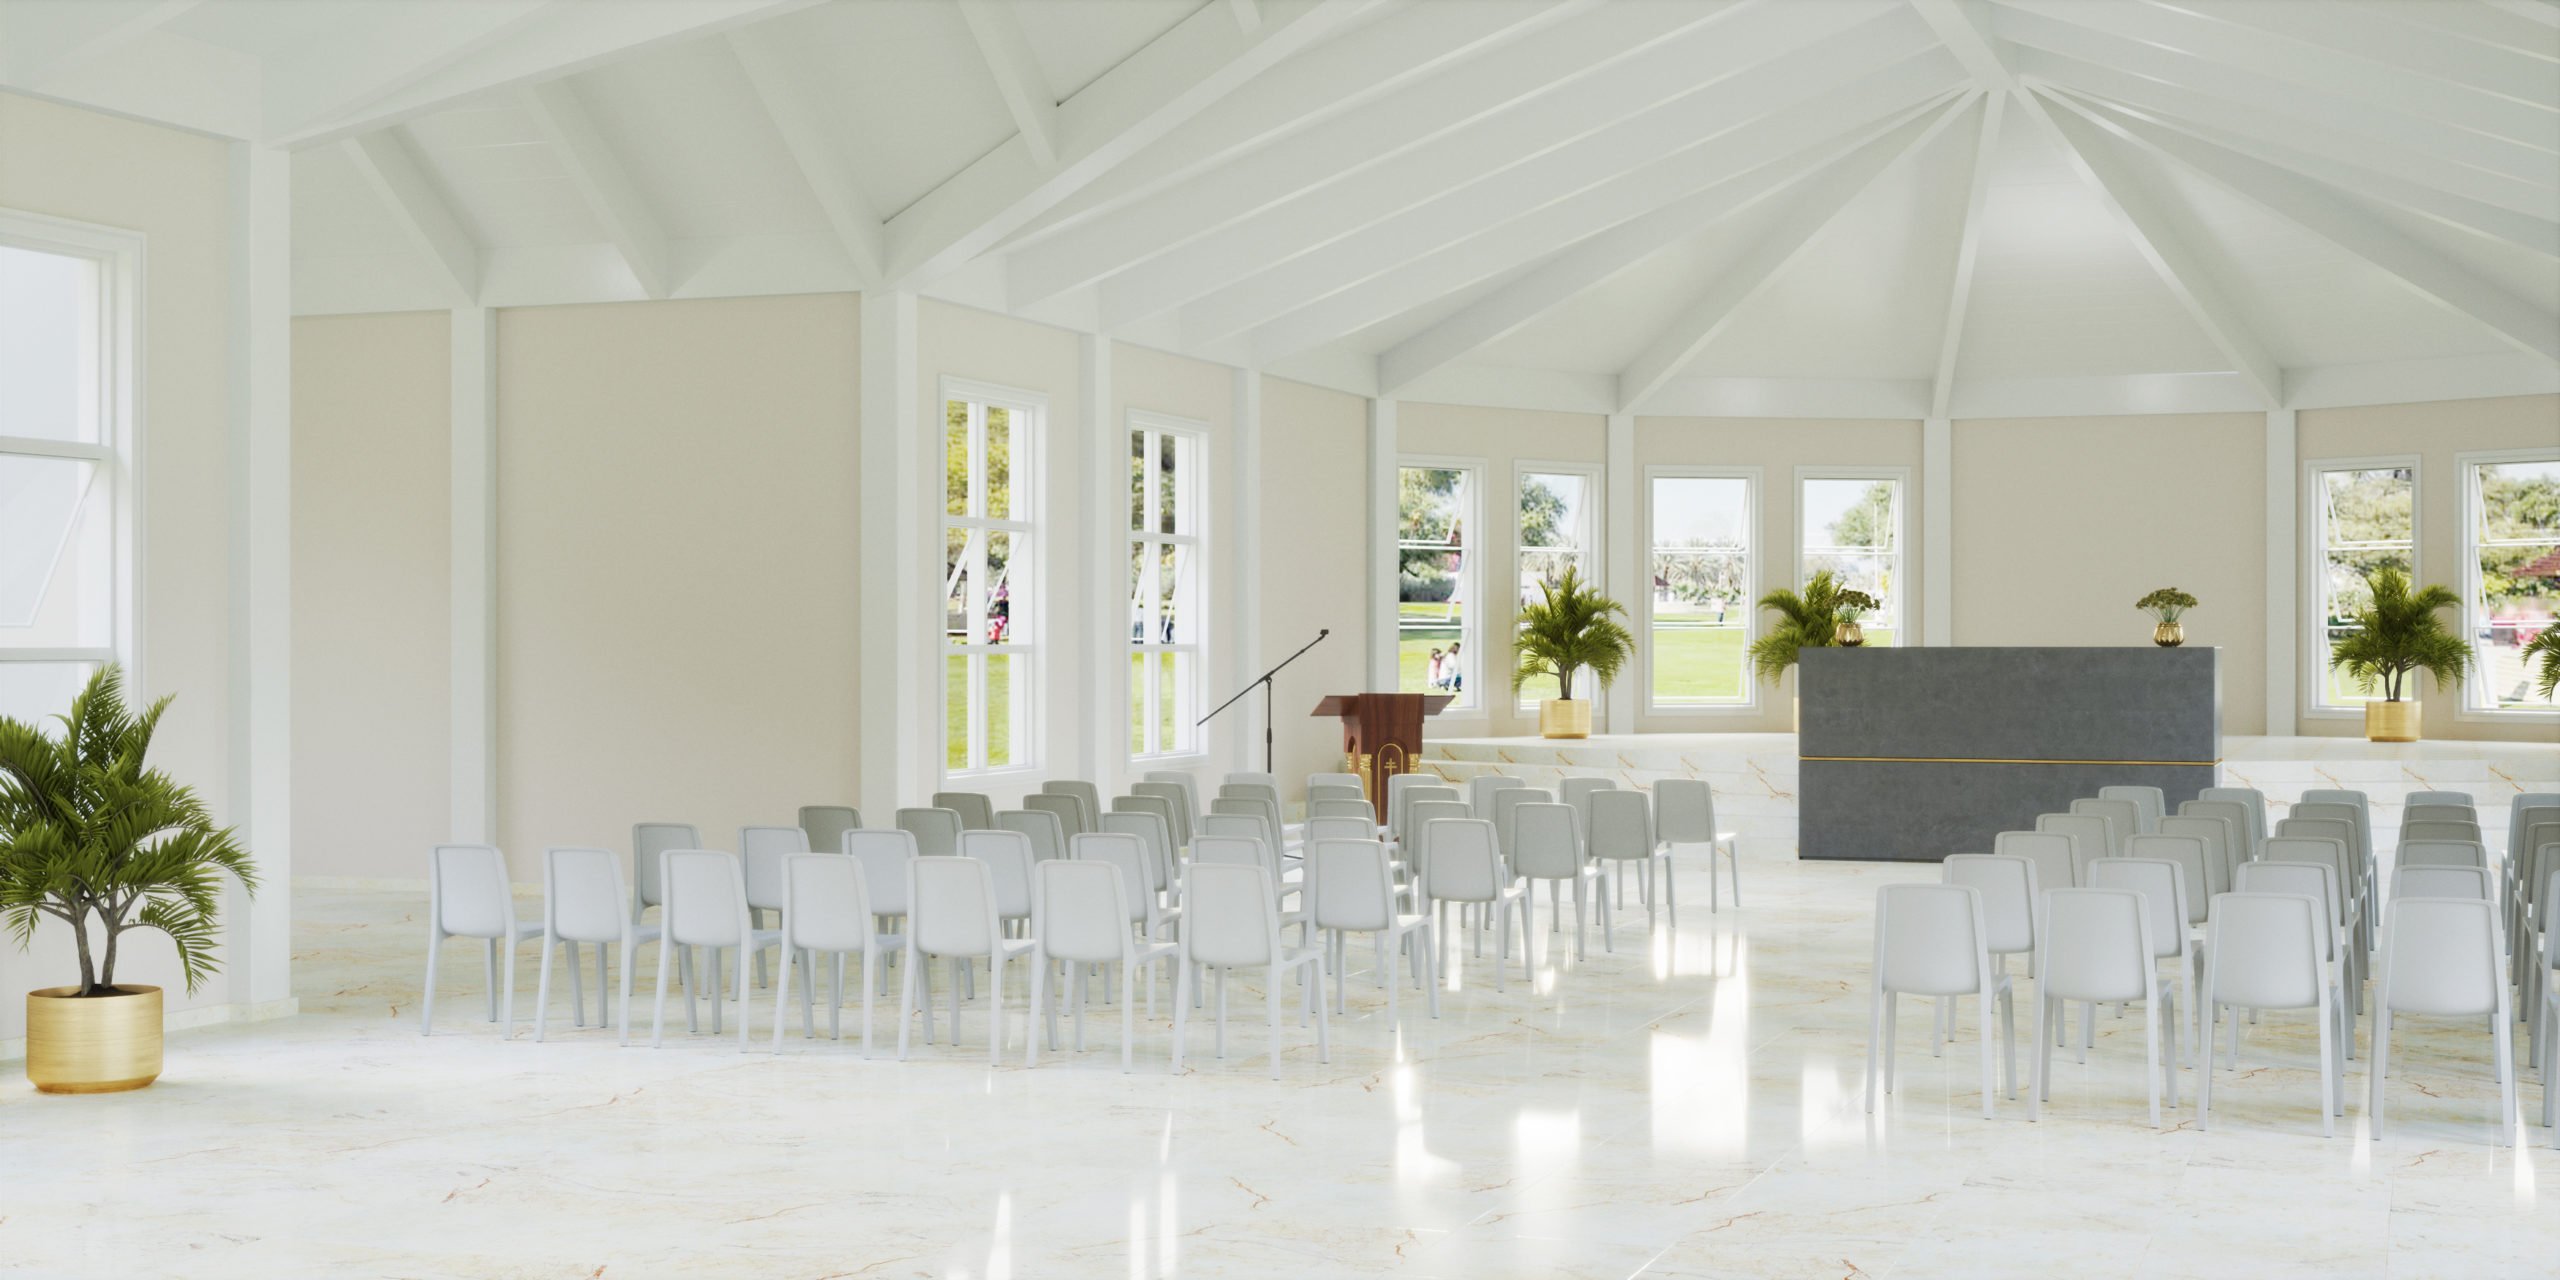 Before a room divider, several rows of white chairs in a church